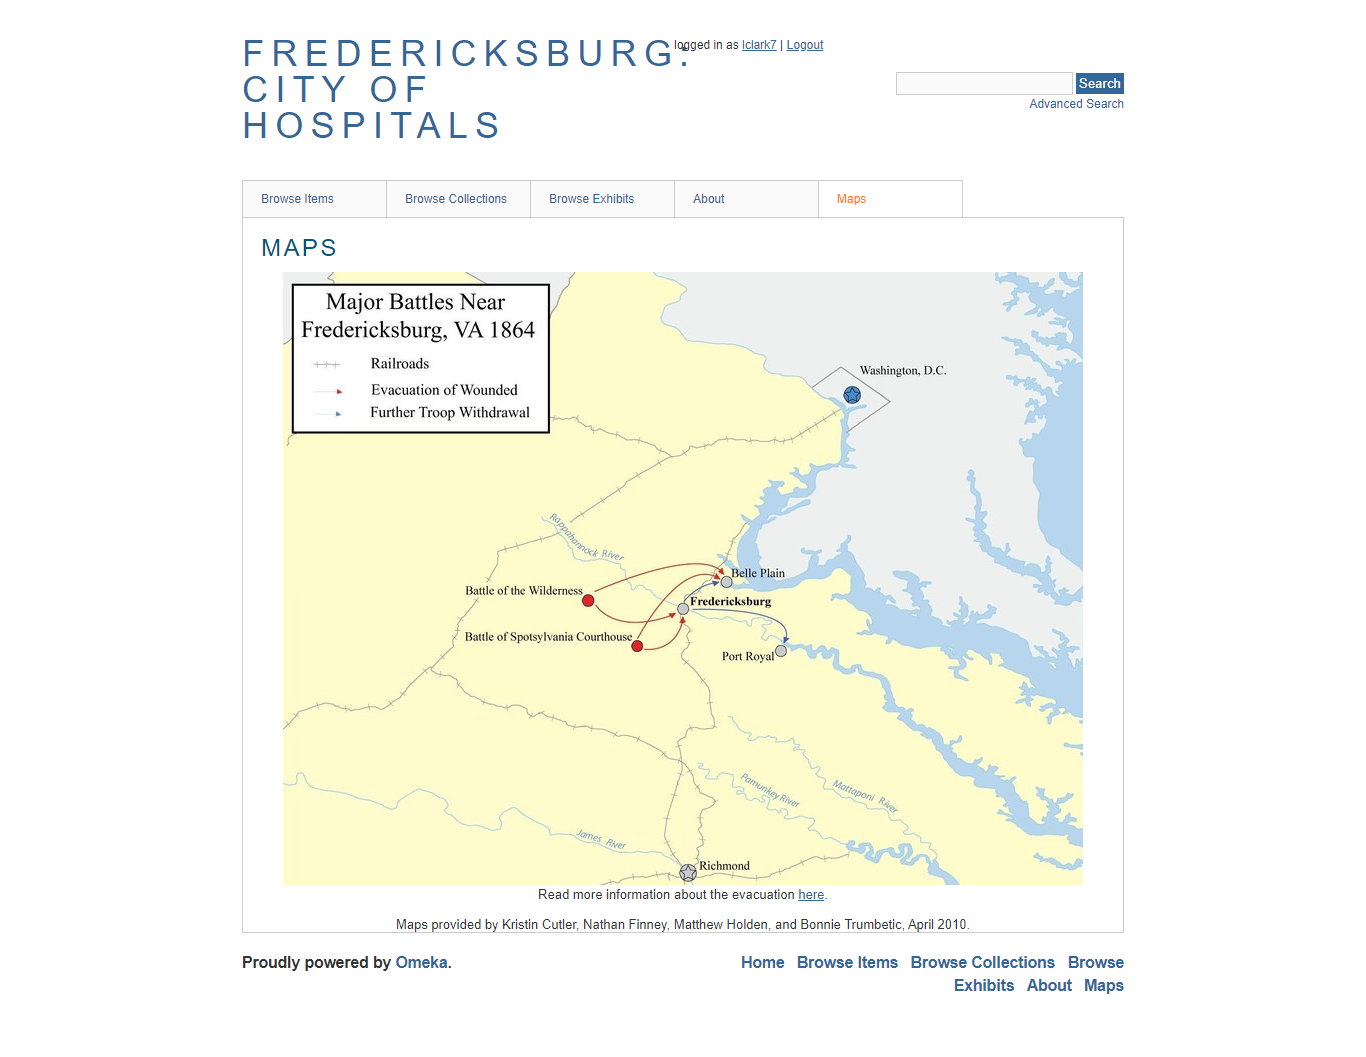 Screenshot of the map page, now only containing one map of the evacuation.